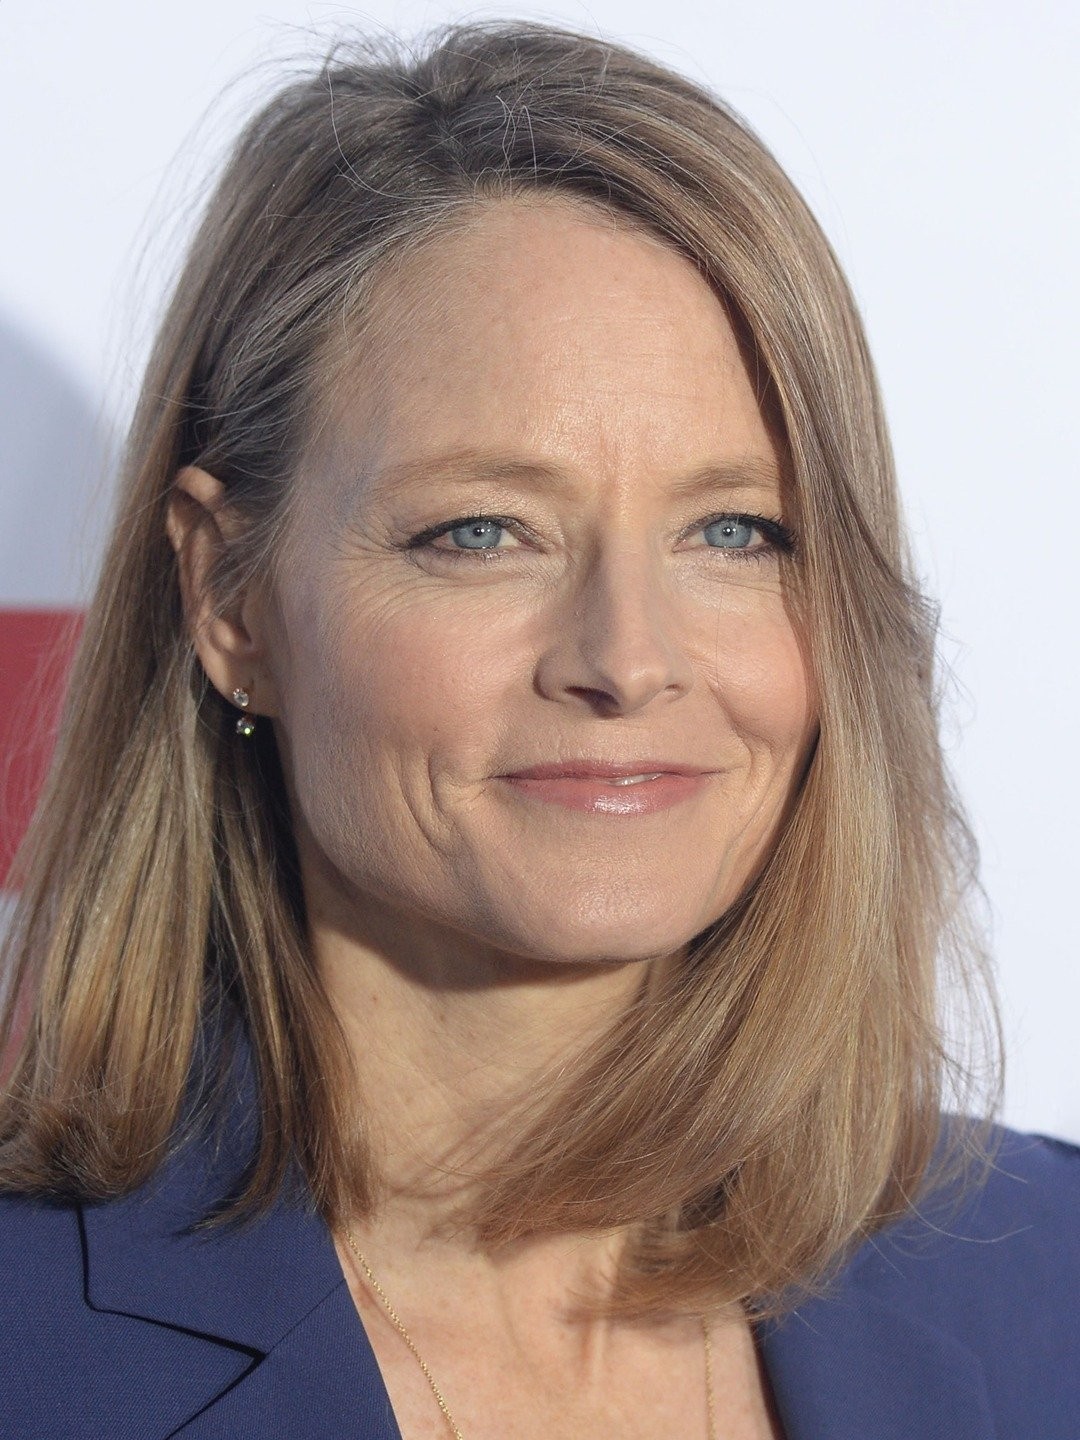 Crime - THE BRAVE ONE - Jodie Foster (Details in Scan)